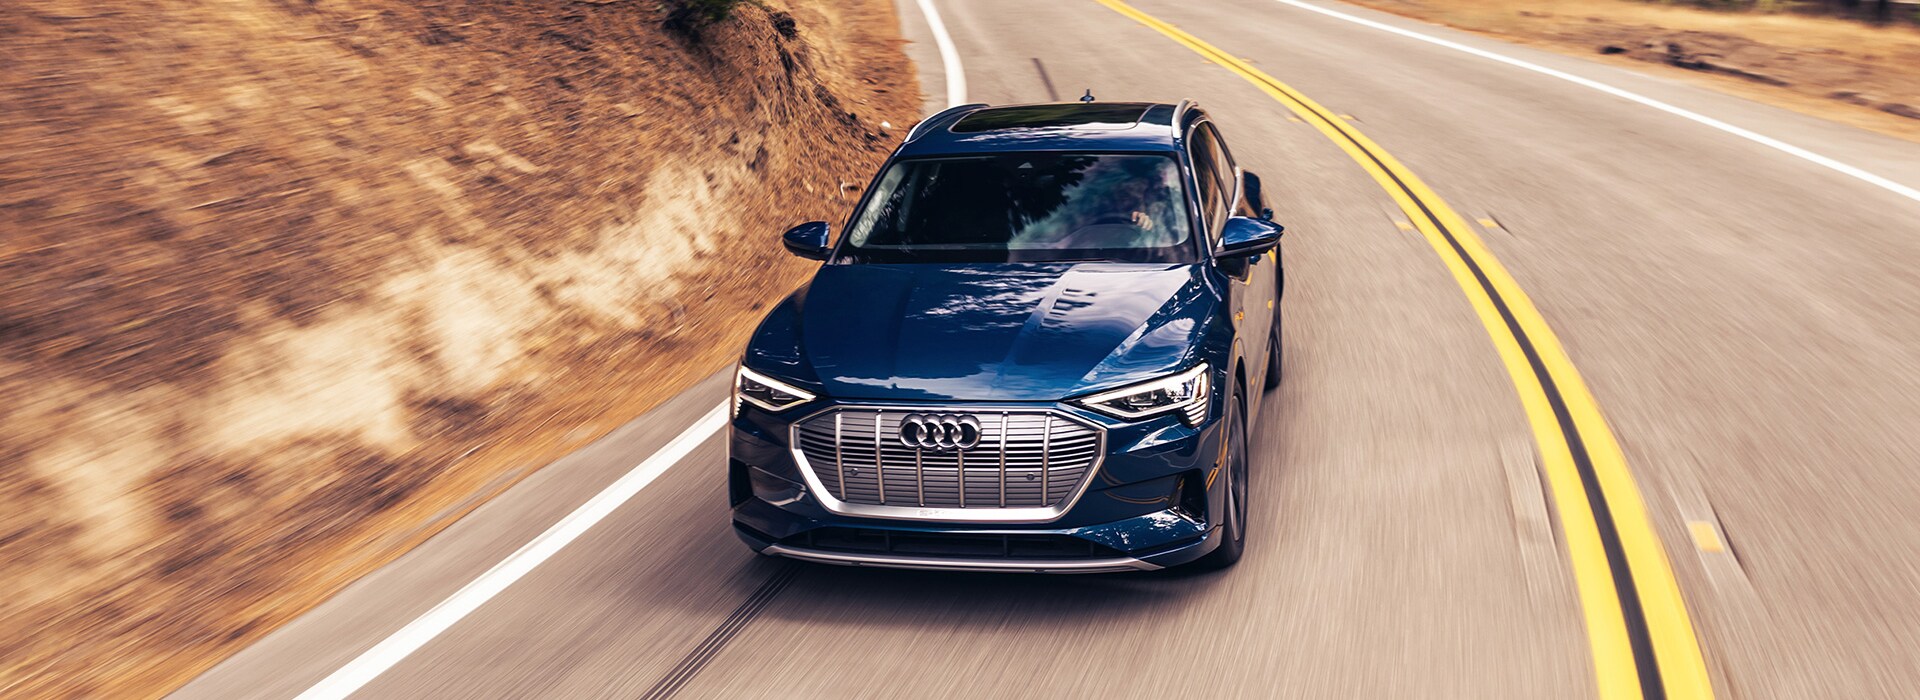 2022 Audi e-tron driving on forest road.